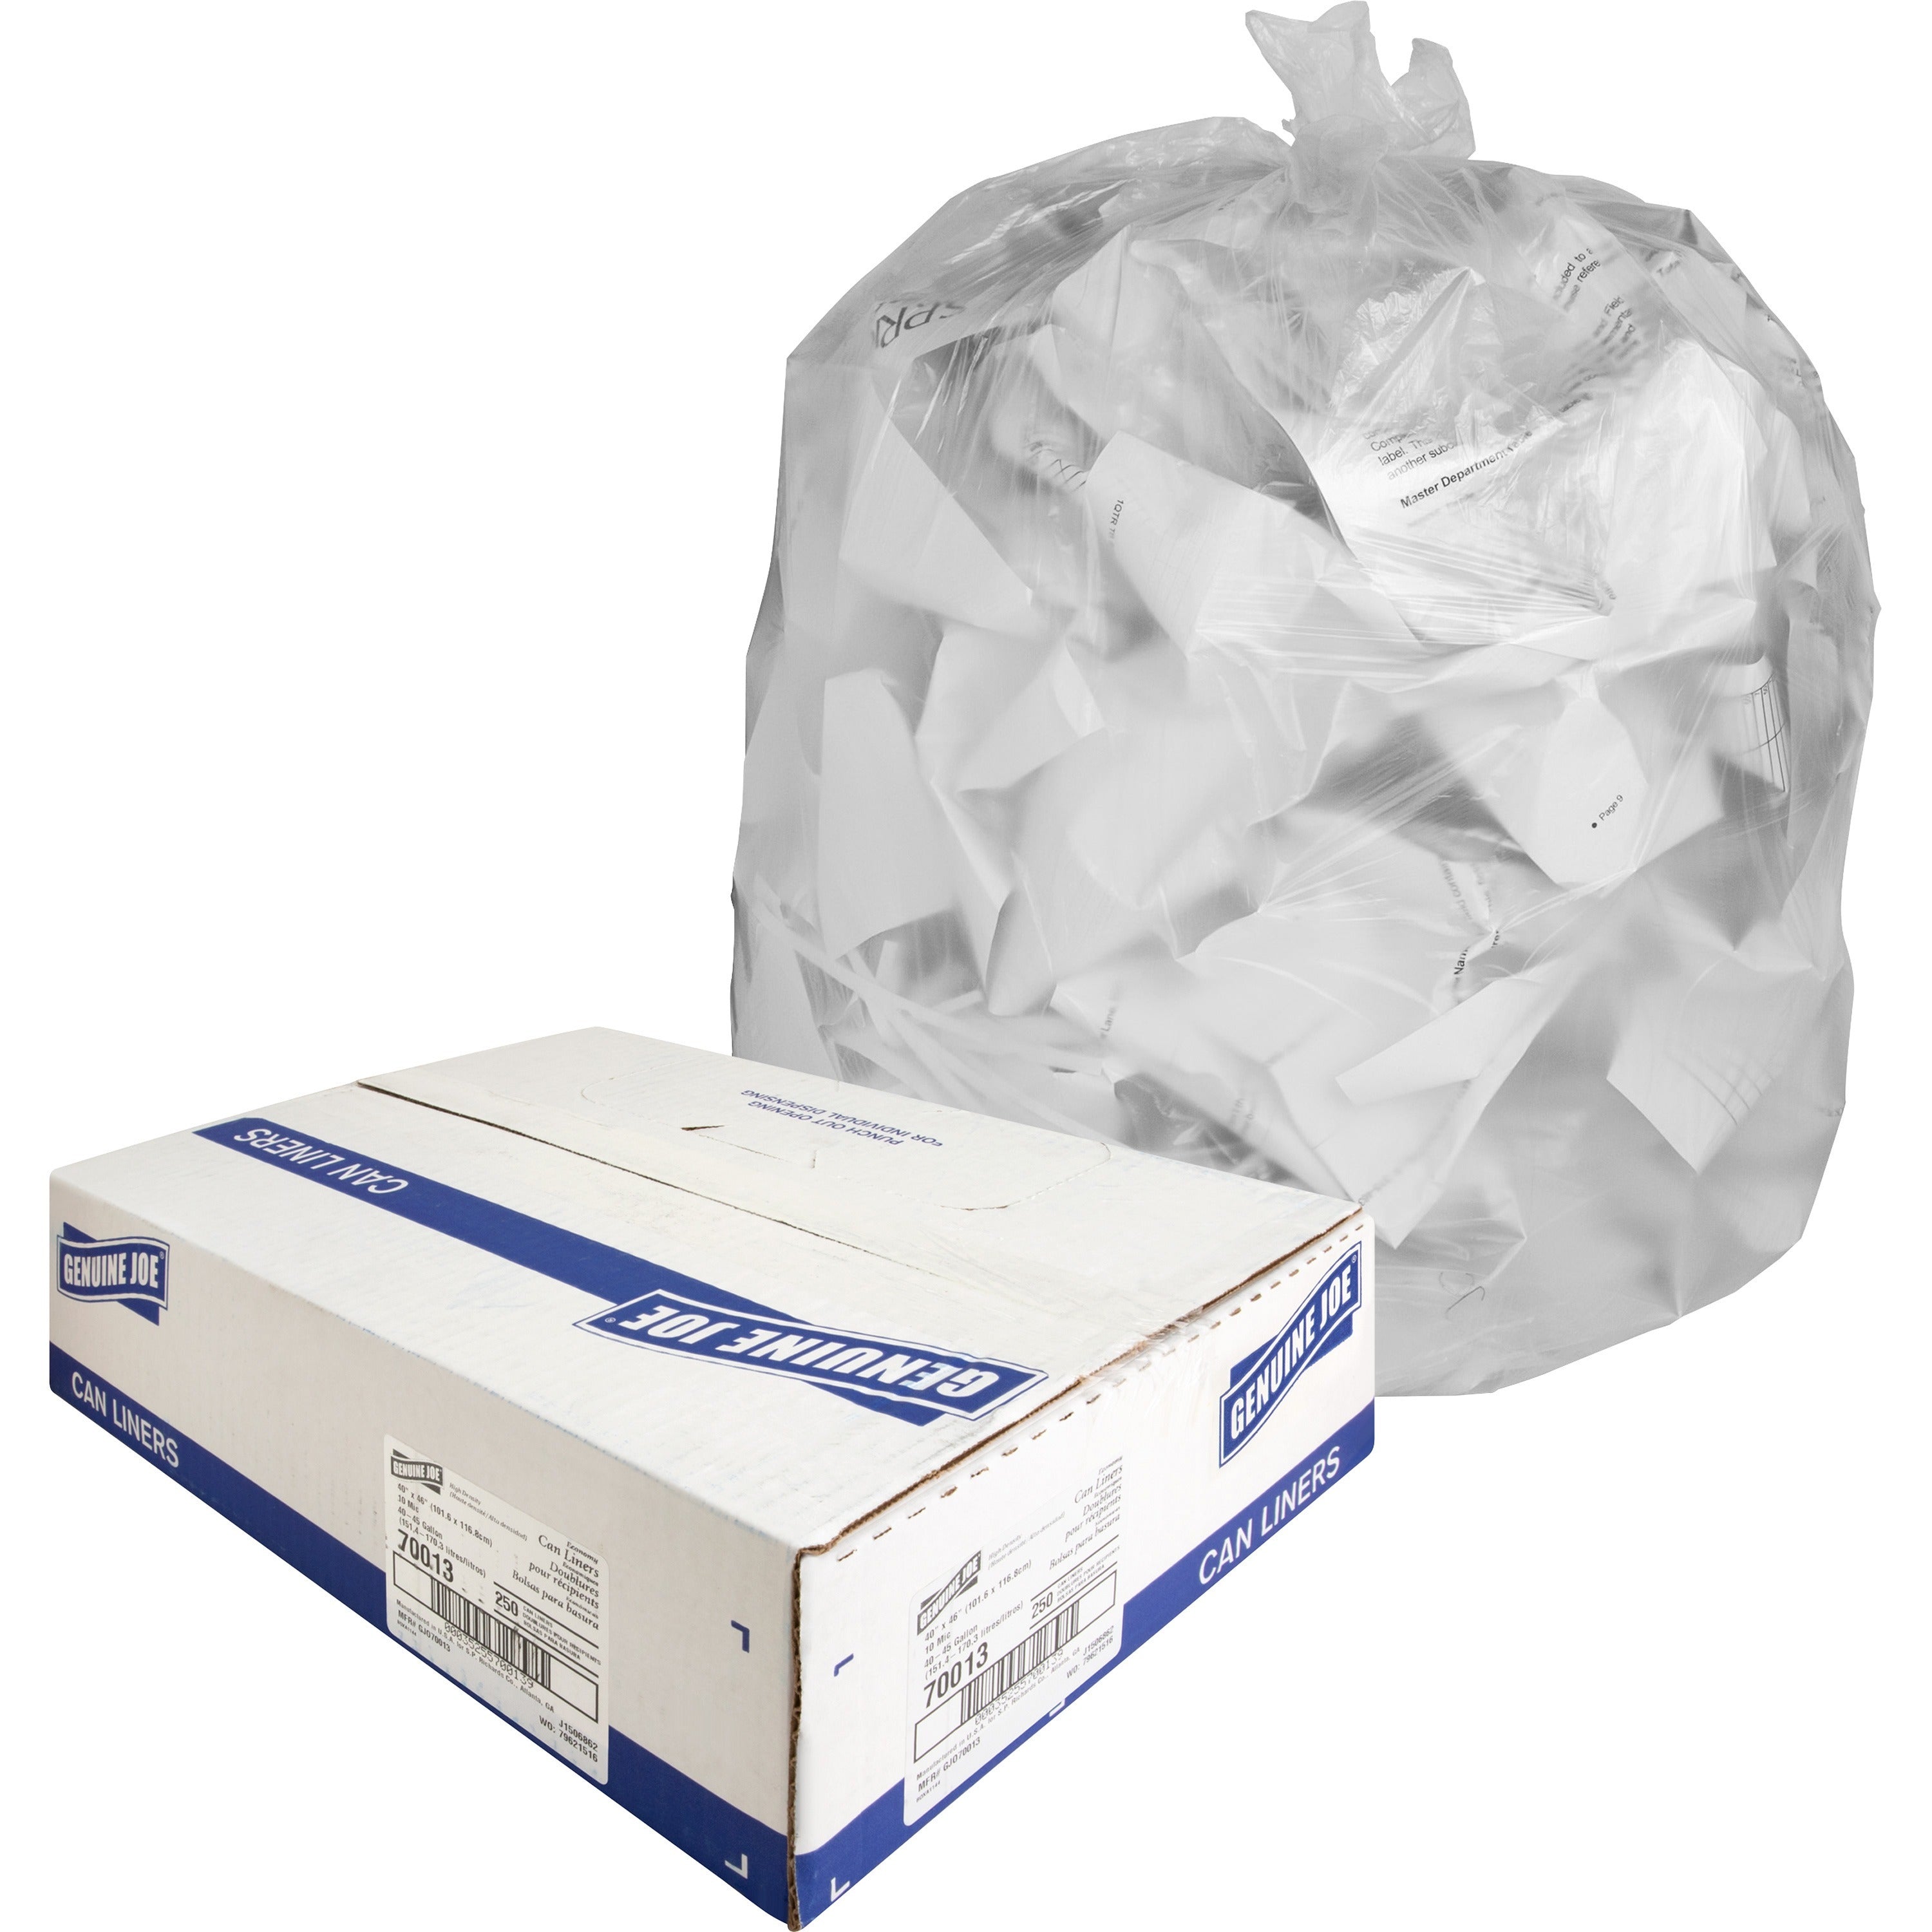 Genuine Joe Economy High-Density Can Liners - Large Size - 45 gal Capacity - 40" Width x 46" Length - 0.39 mil (10 Micron) Thickness - High Density - Translucent - Resin - 250/Carton - 